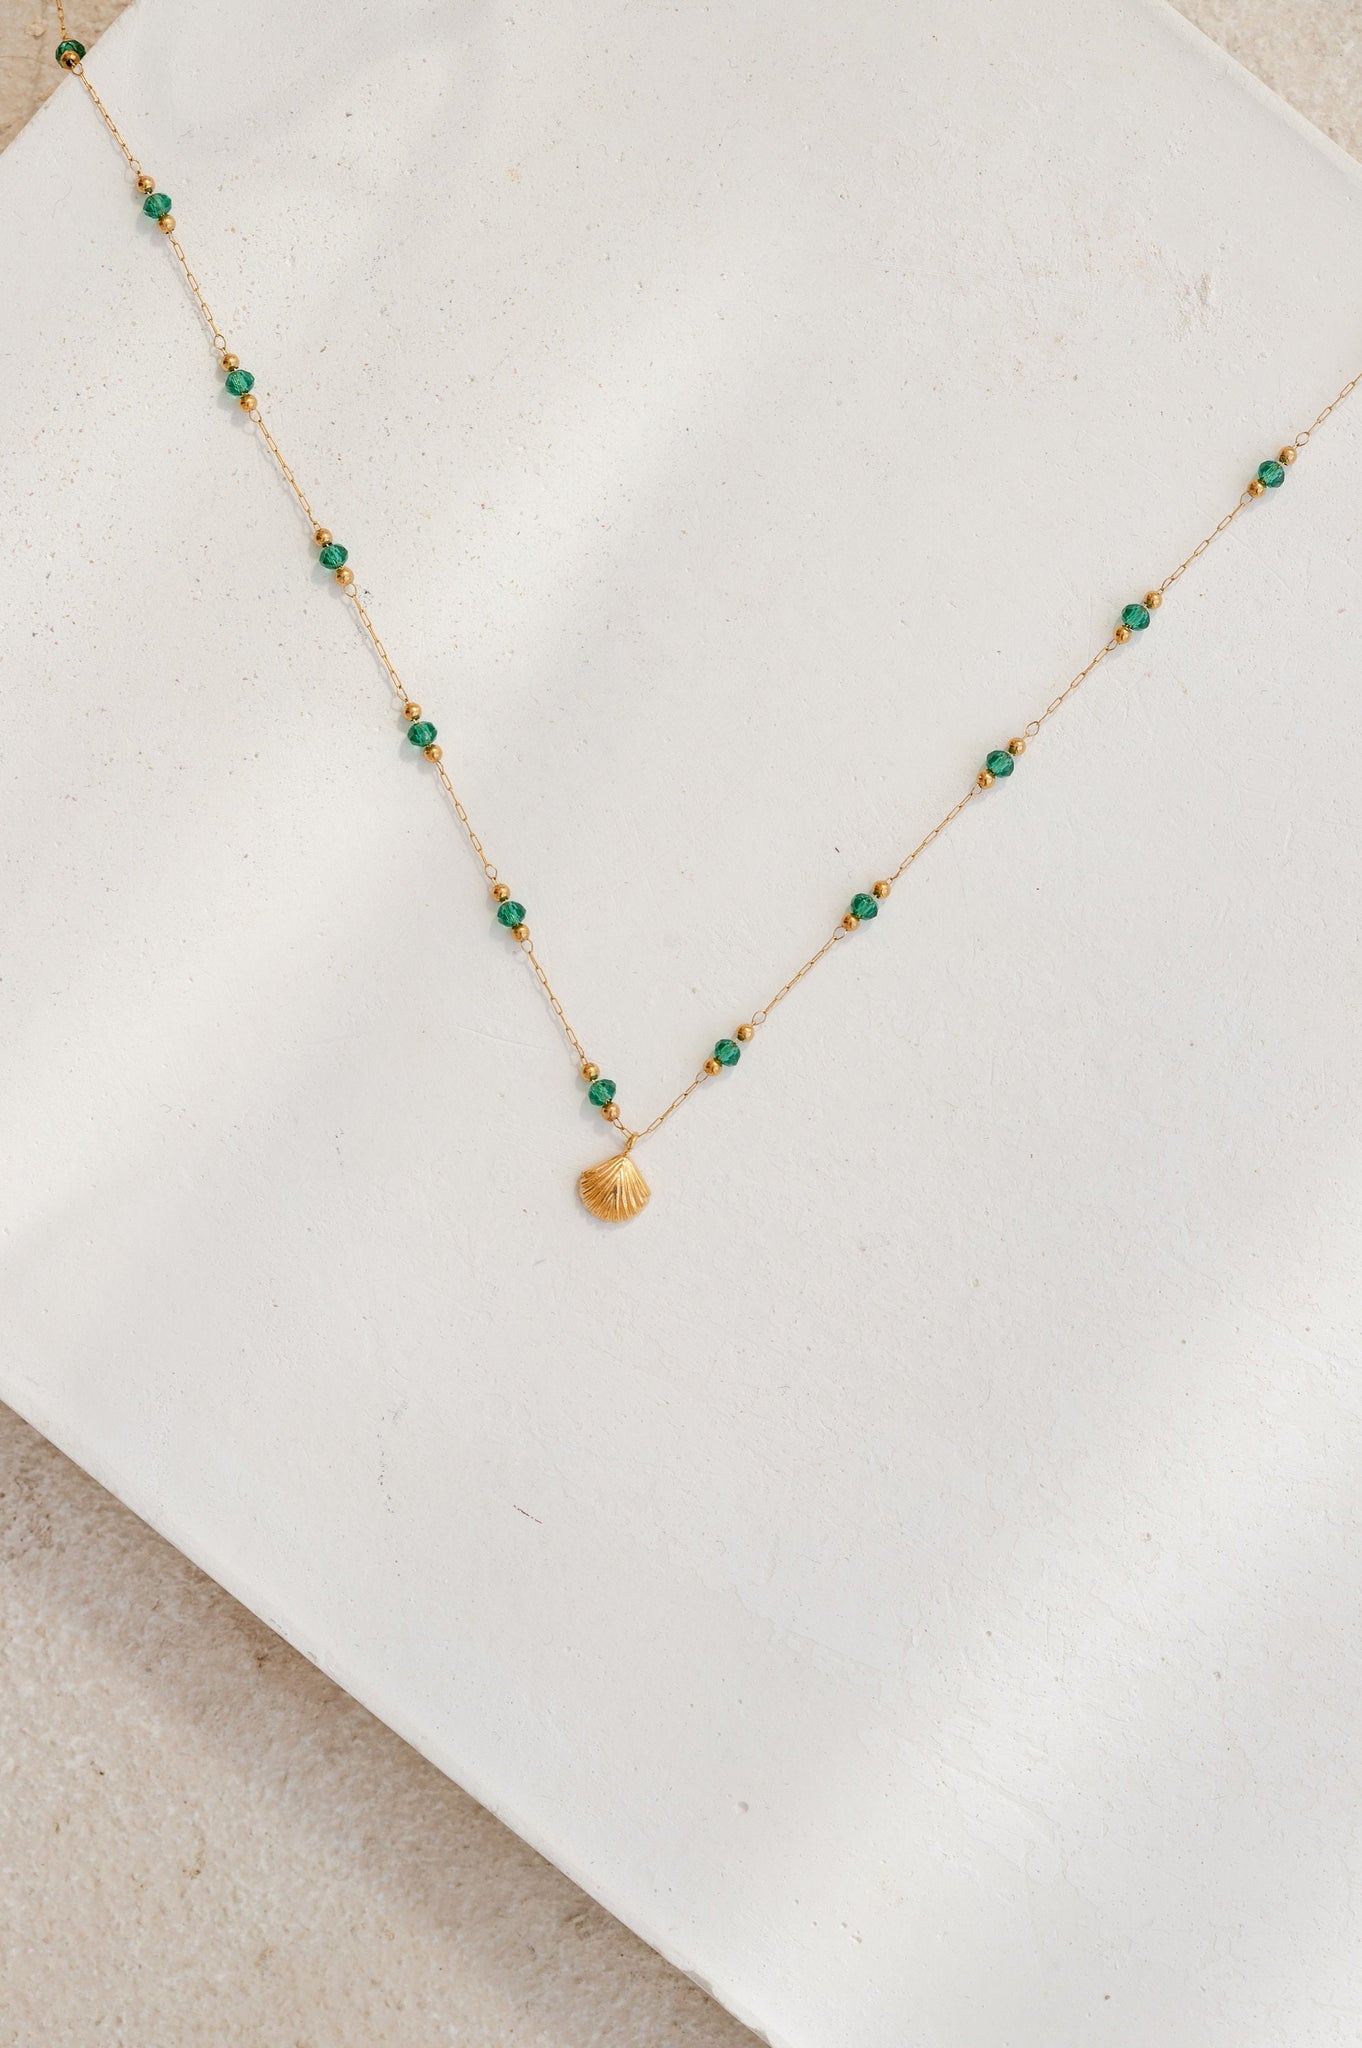 Green Stone Shell Necklace, 18K Gold, Natural Stone Necklace, Mothers Day Gift, Green Beaded Necklace, Gift For Mom, Necklaces For Women